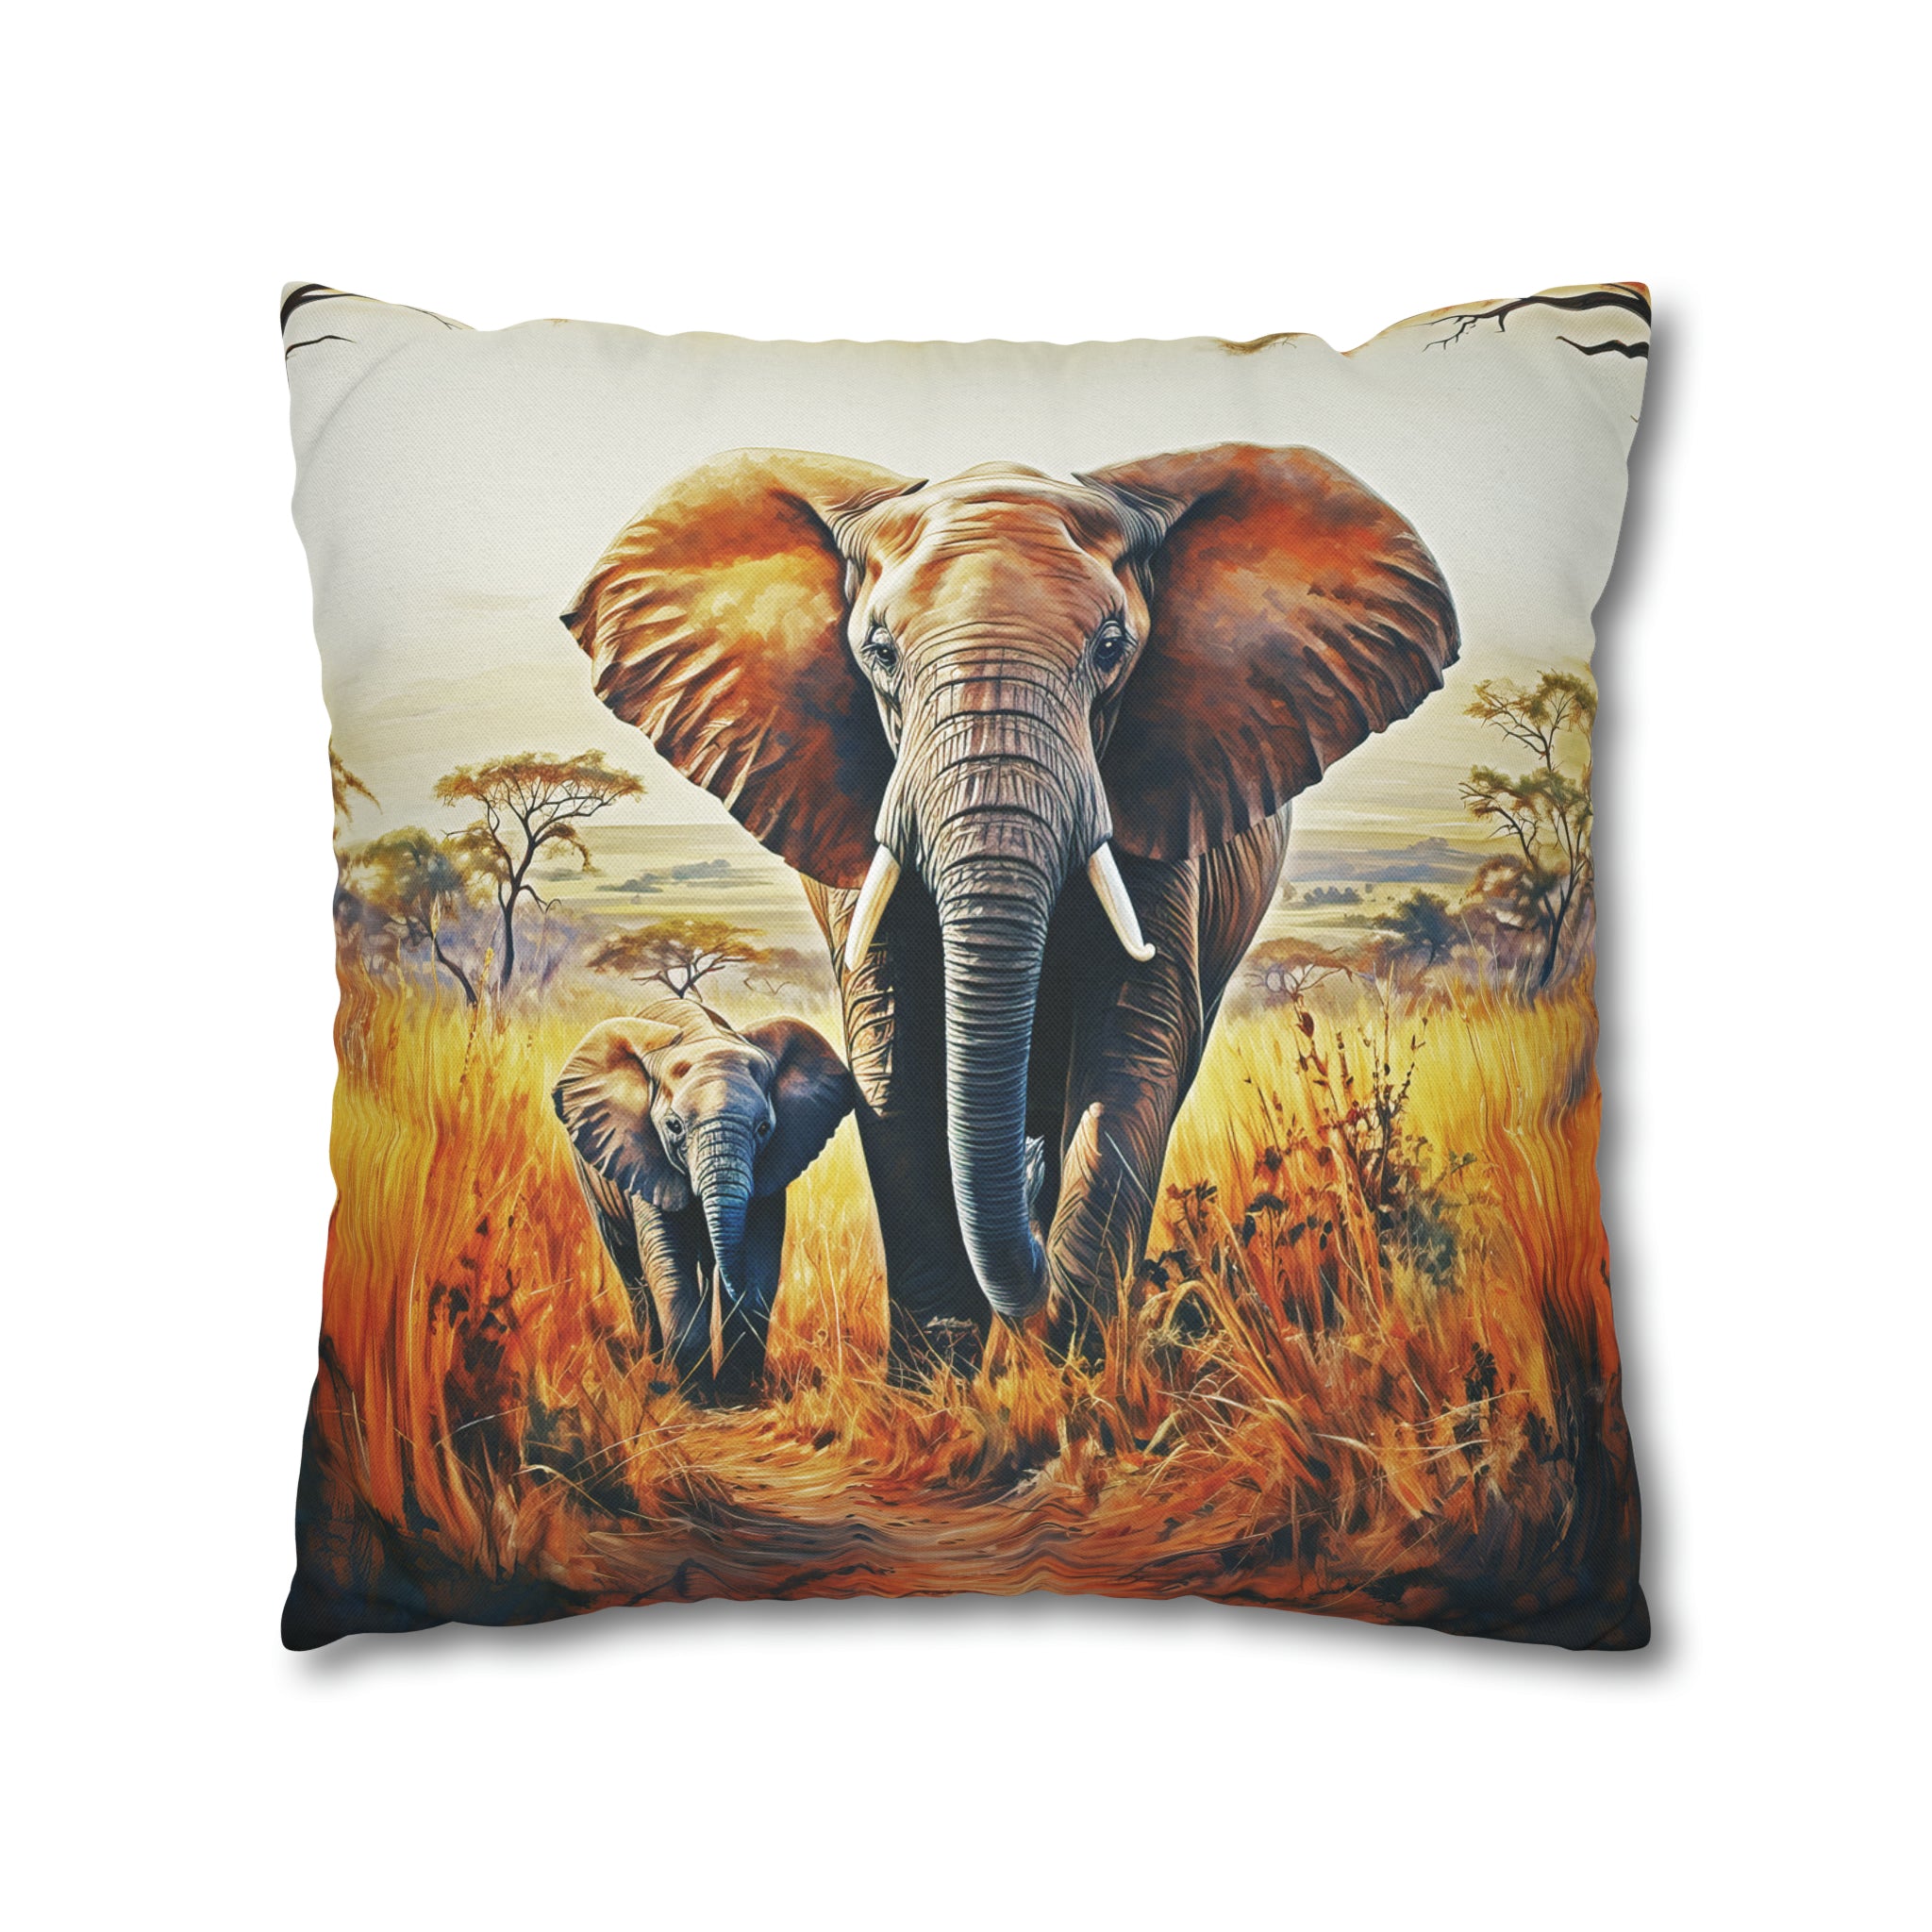 Square Pillow Case 18" x 18", CASE ONLY, no pillow form, original Art ,Colorful, a Mother Elephant and her Calf on the Plains of Africa